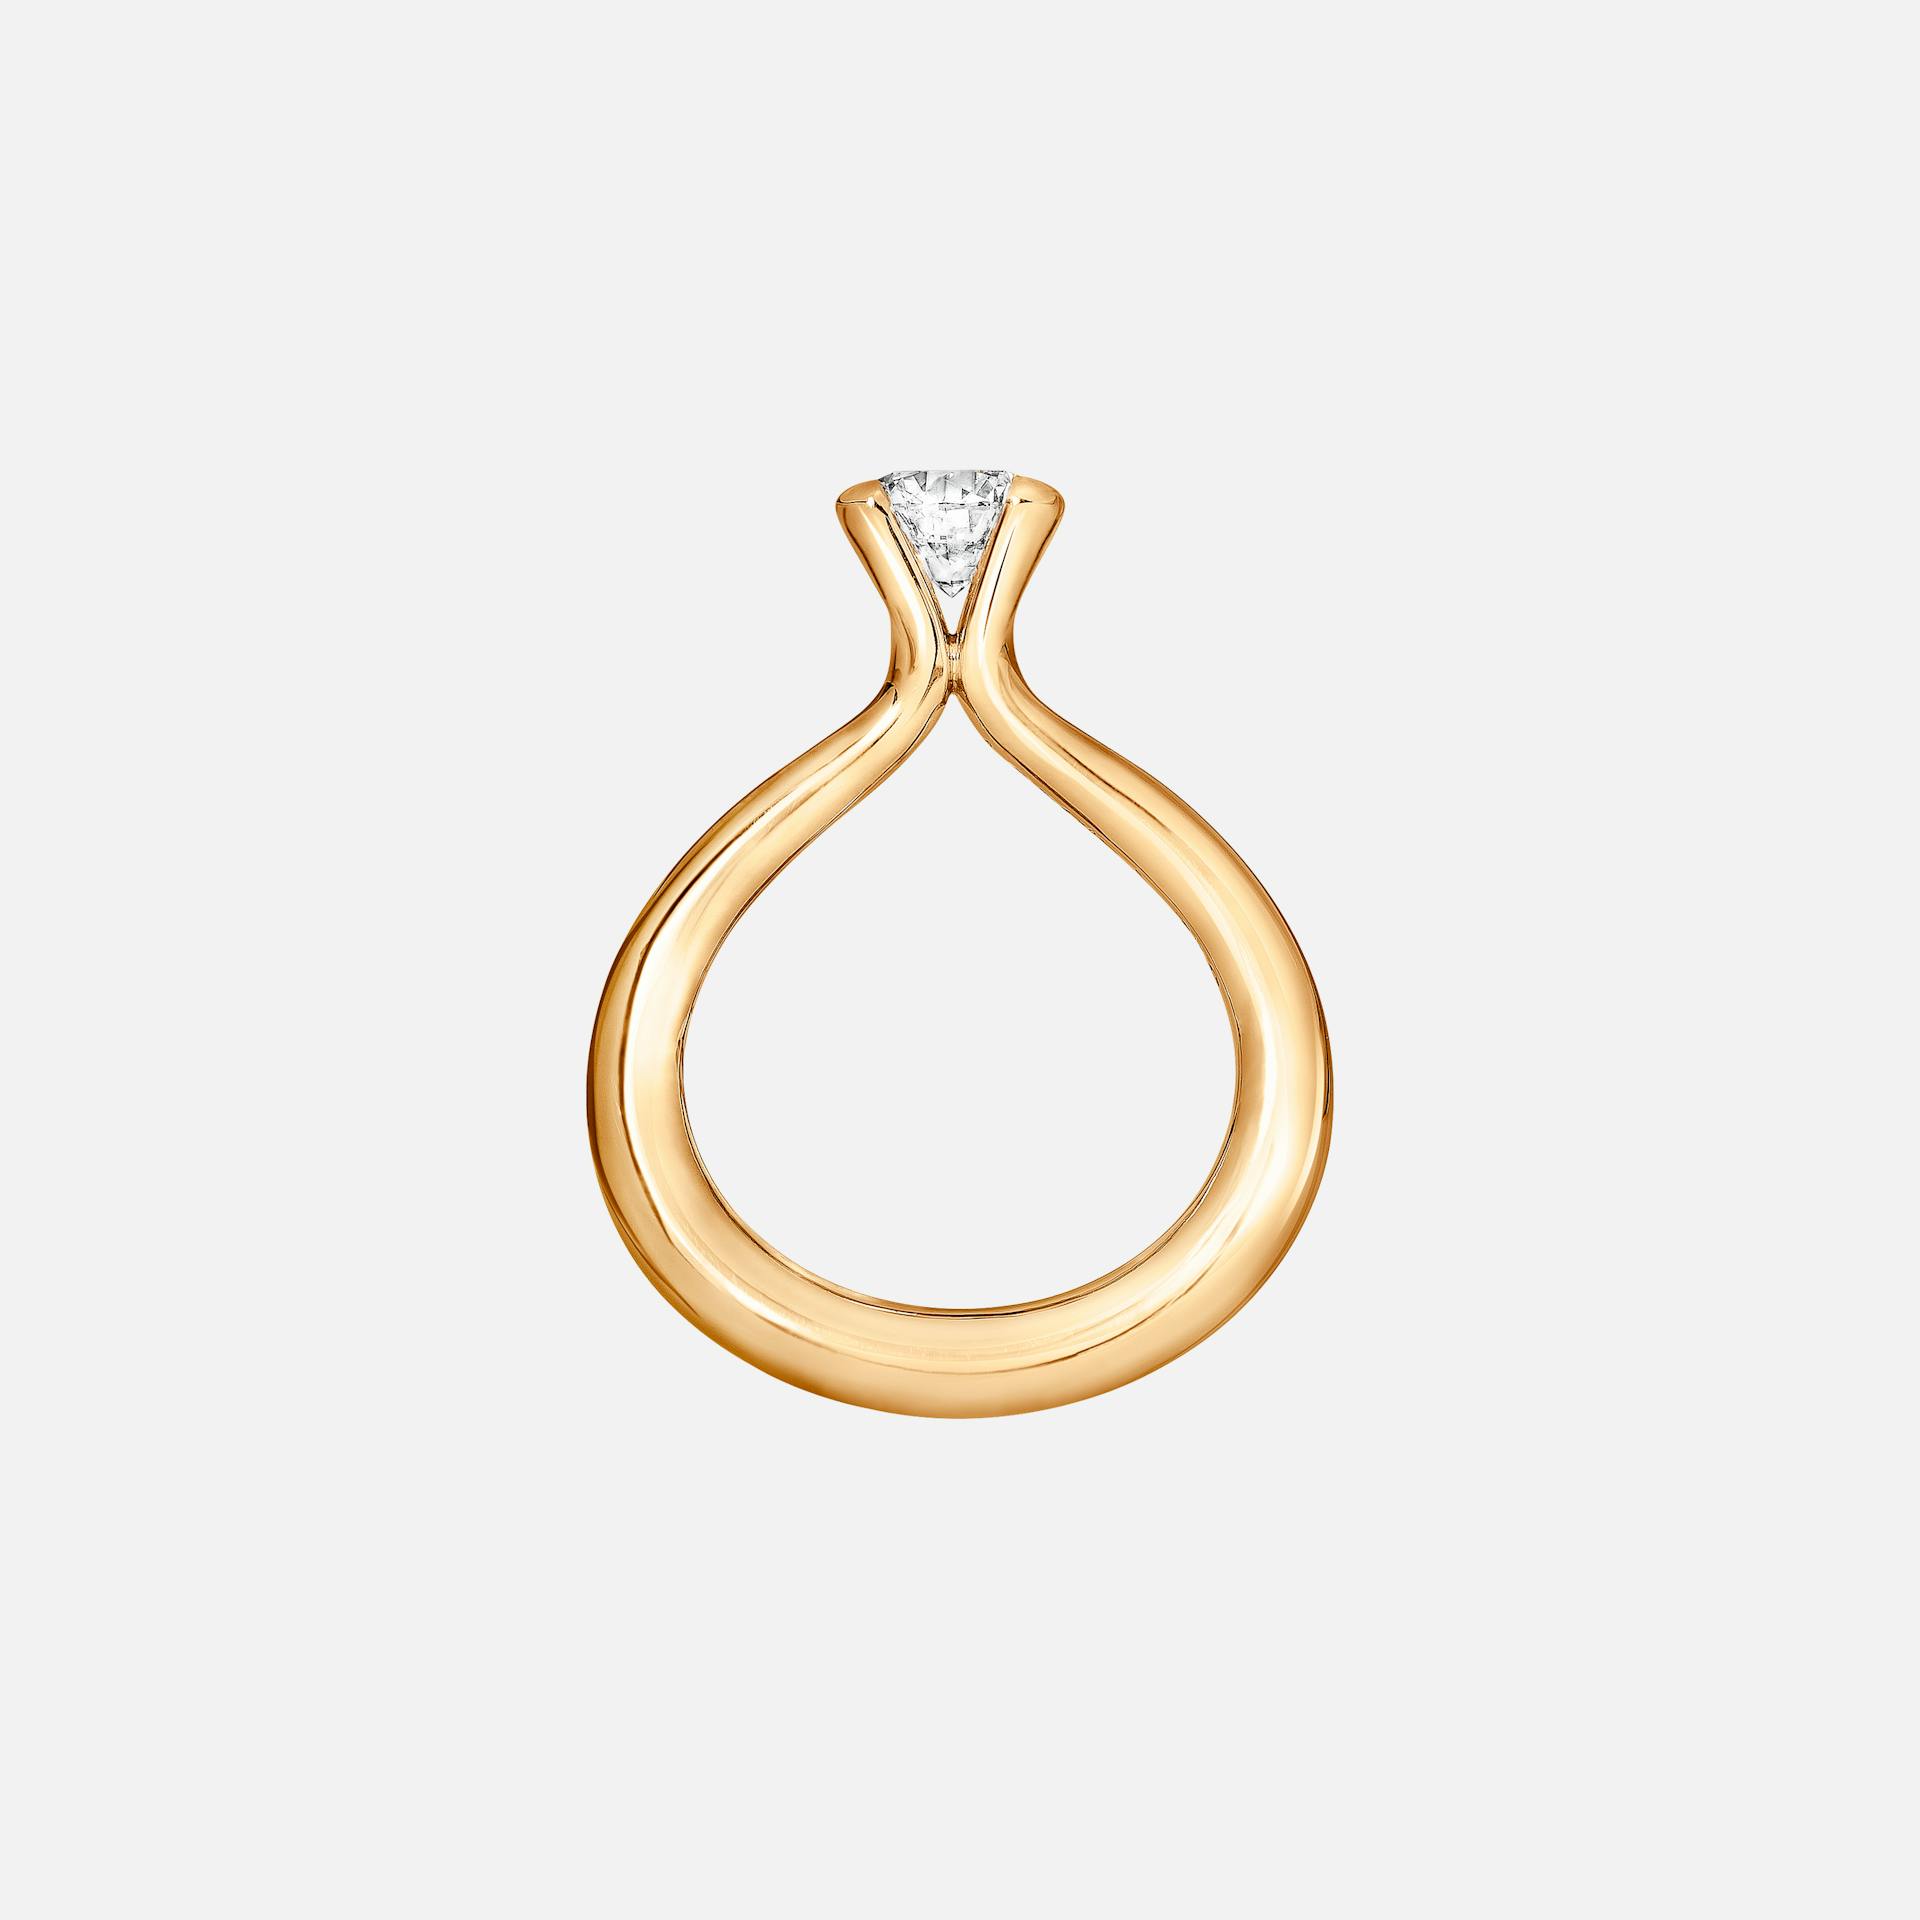 Solitaire Ring Heavy in Yellow Gold with Brilliant Cut Diamond  |  Ole Lynggaard Copenhagen 